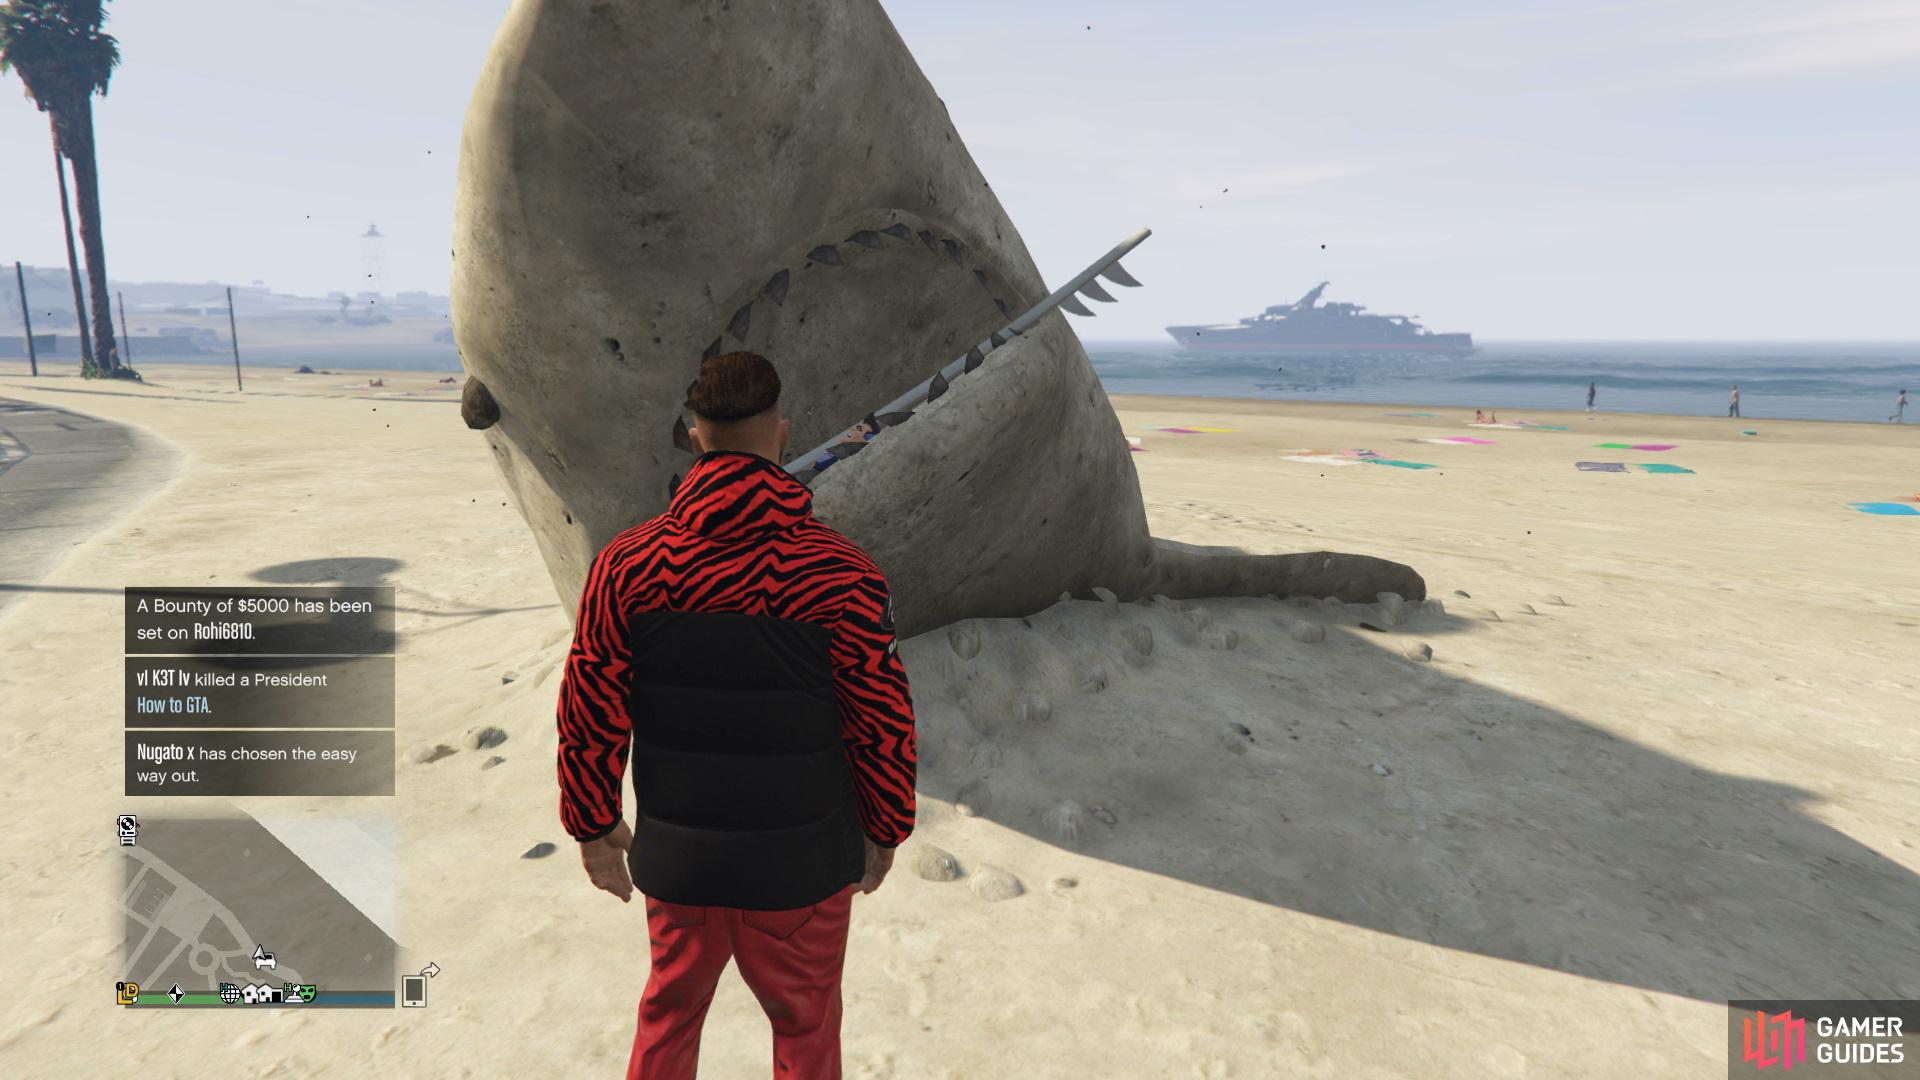 to find the action figure sitting in the mouth of the shark sculpture. 